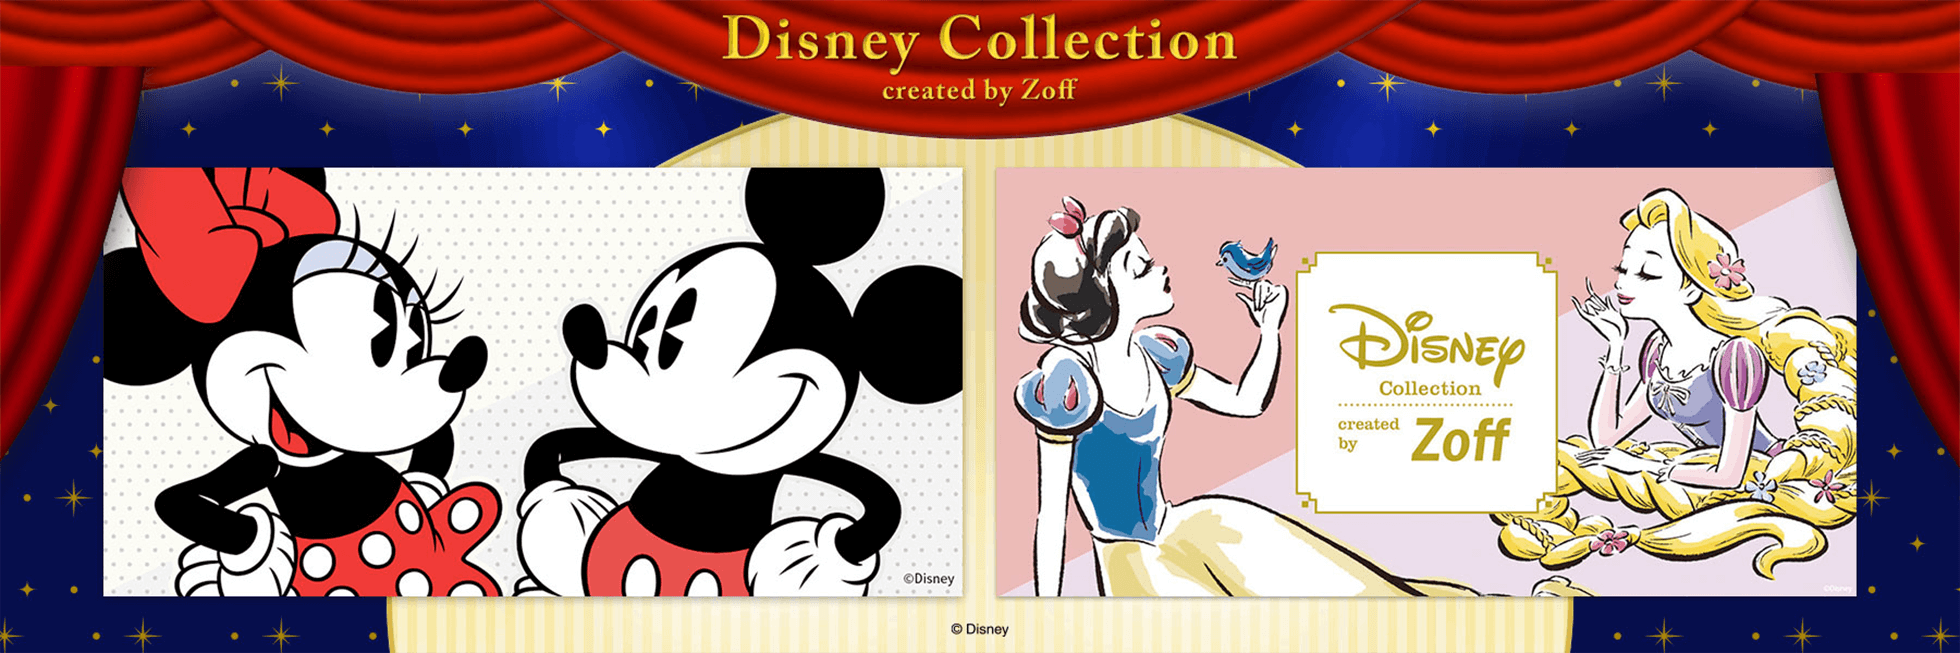 Disney Collection created by Zoff Sunglasses